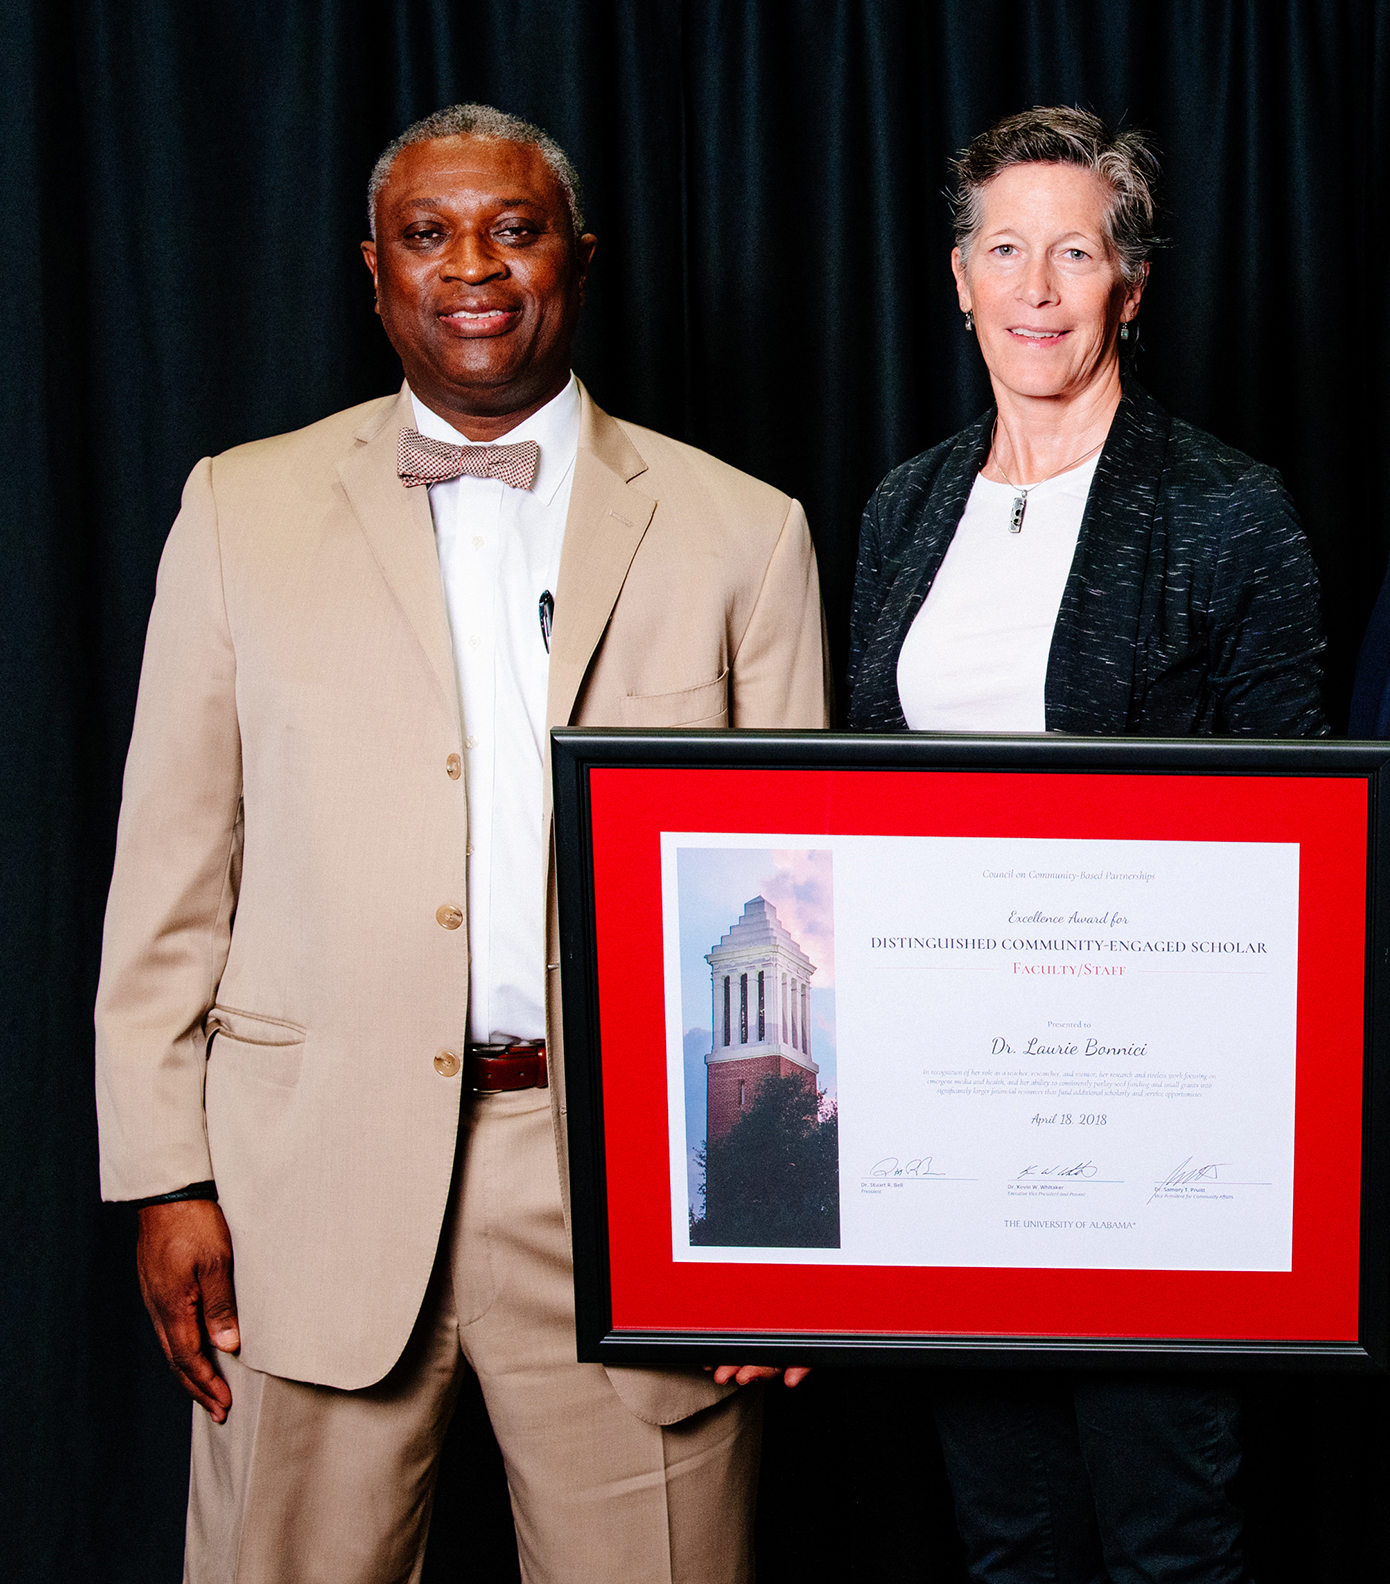 Dr. Laurie Bonnici, with Dr. Samory T. Pruitt receives the Distinguished Community-Engaged Scholar Award–Faculty.